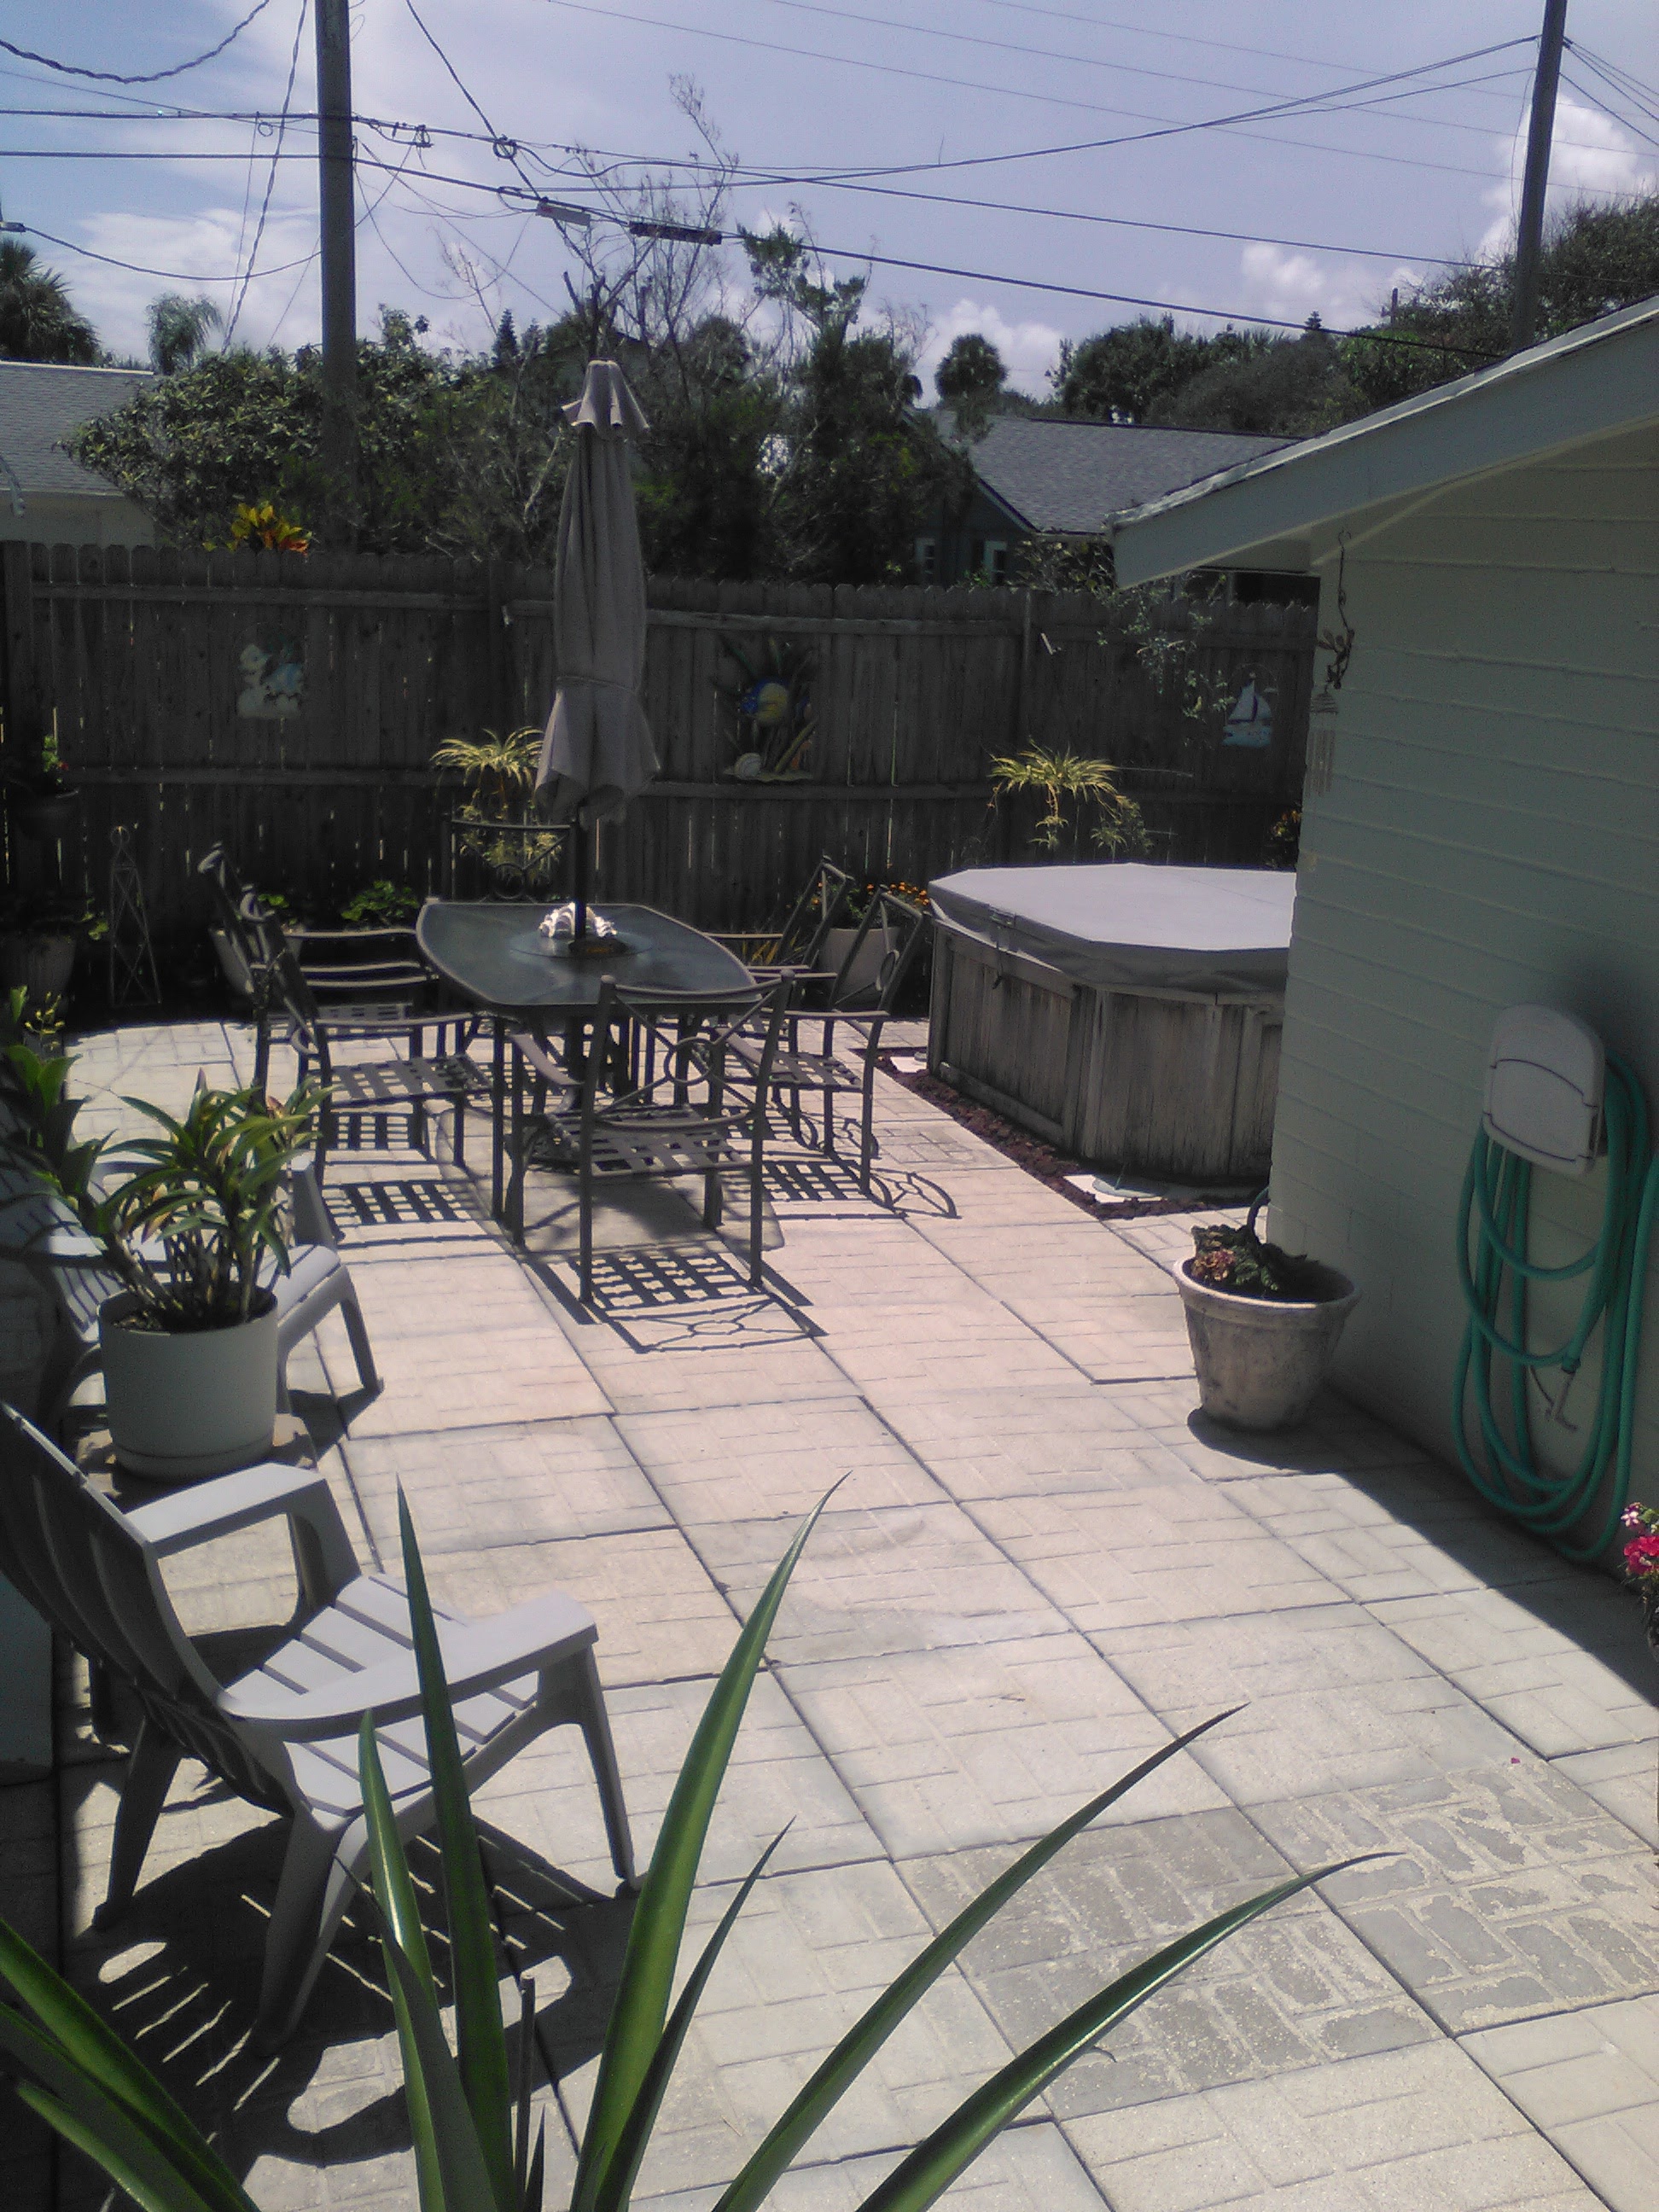 Patio with patio furniture and plants in the light of a partial eclipse.